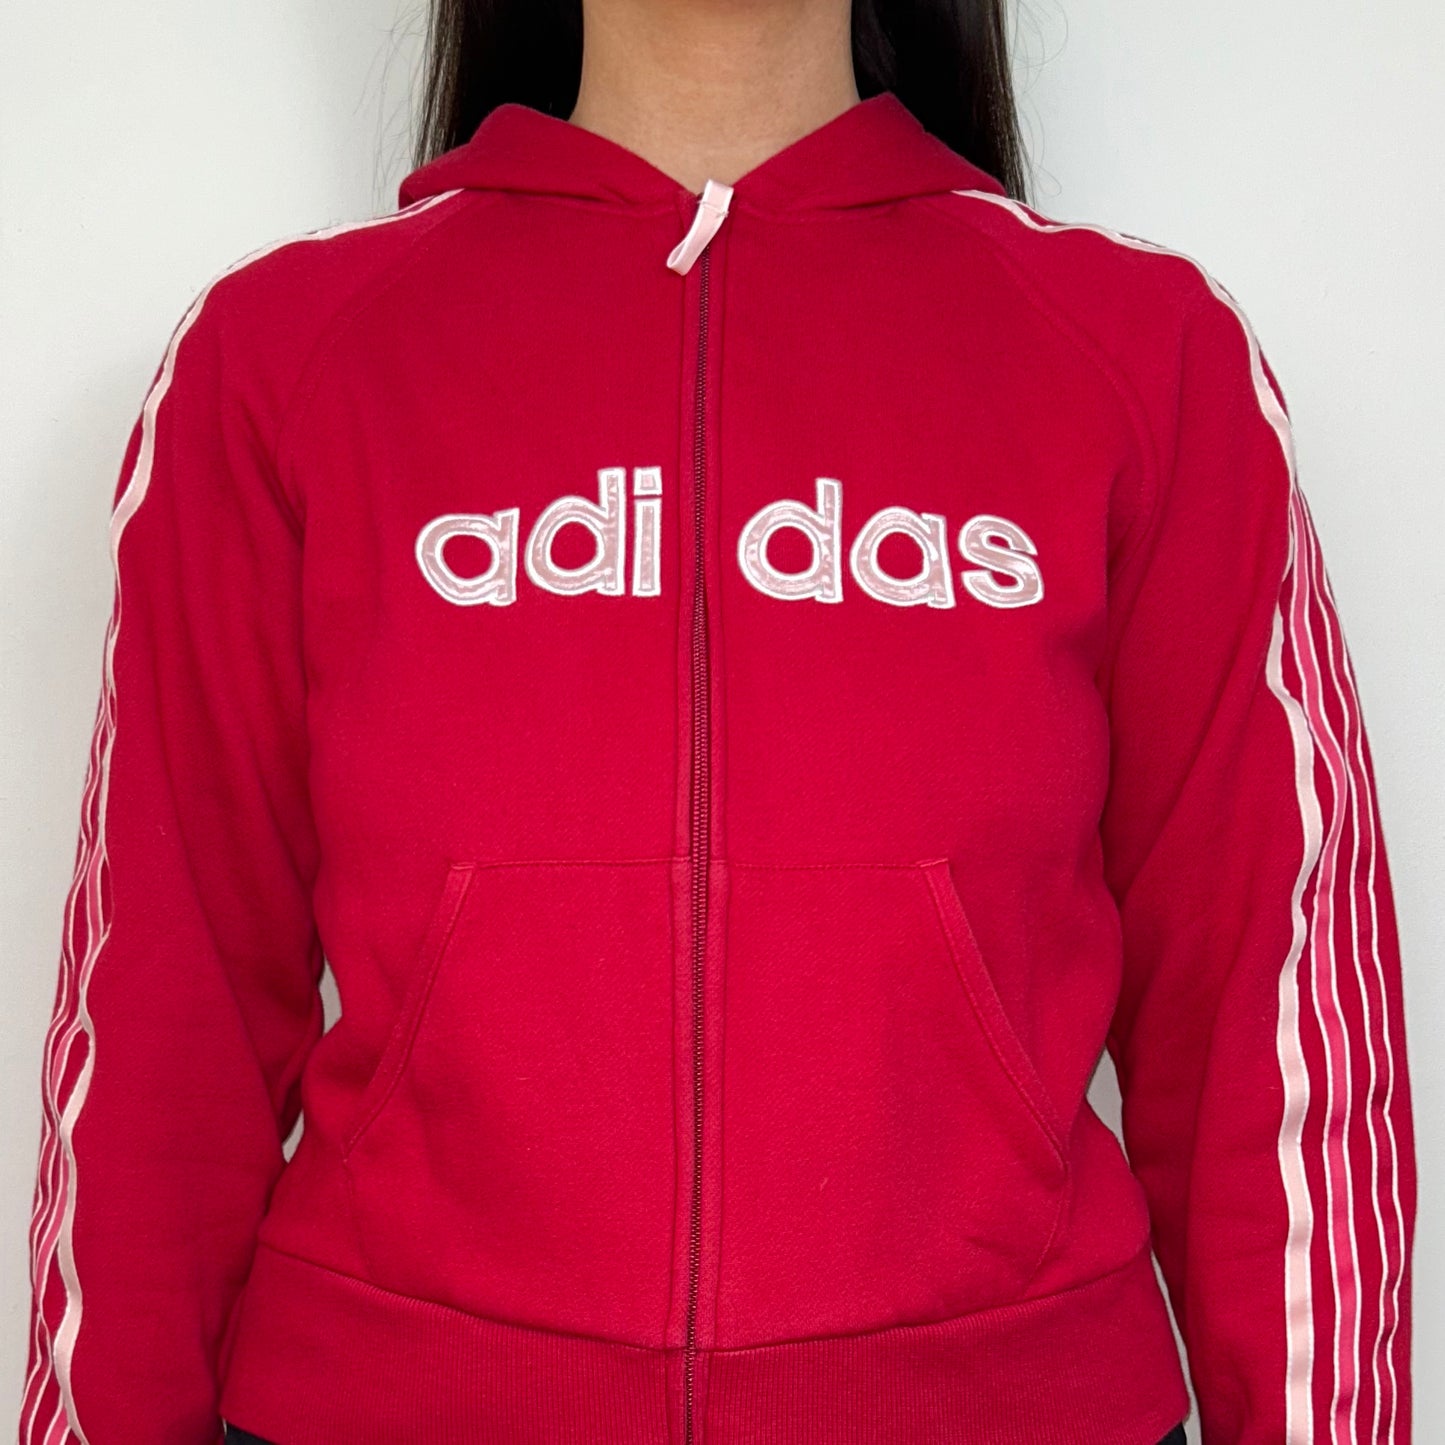 close up of red zip up hoodie with big adidas text logo shown on a model